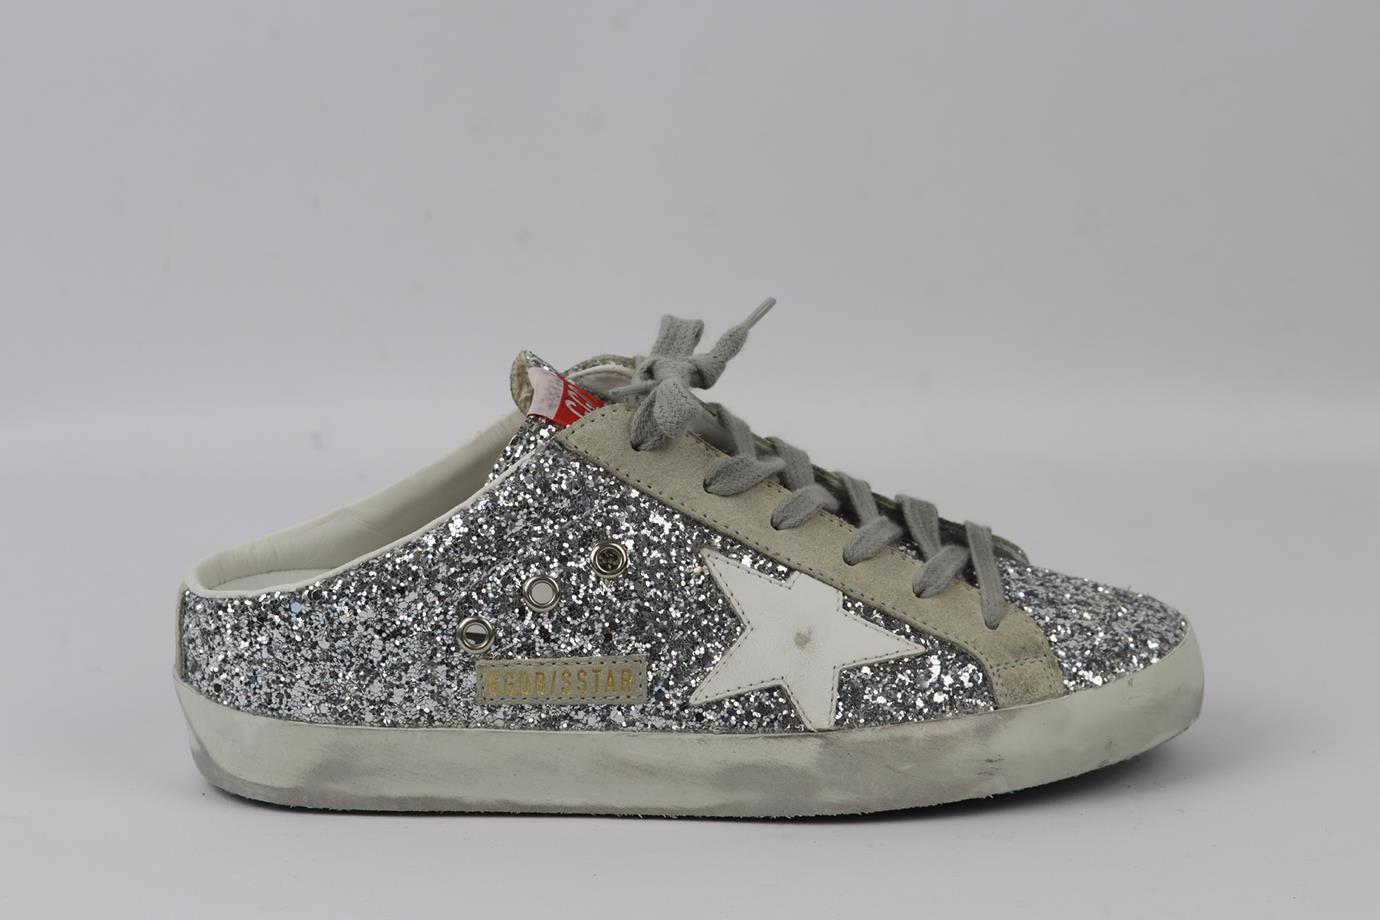 Golden Goose Deluxe Brand glittered leather and suede slip on sneakers. Silver, ecru, grey and white. Slip on. Does not come with dustbag or box. Size: EU 38 (UK 5, US 8). Insole: 9.9 in. Heel Height: 1.6 in. New without box